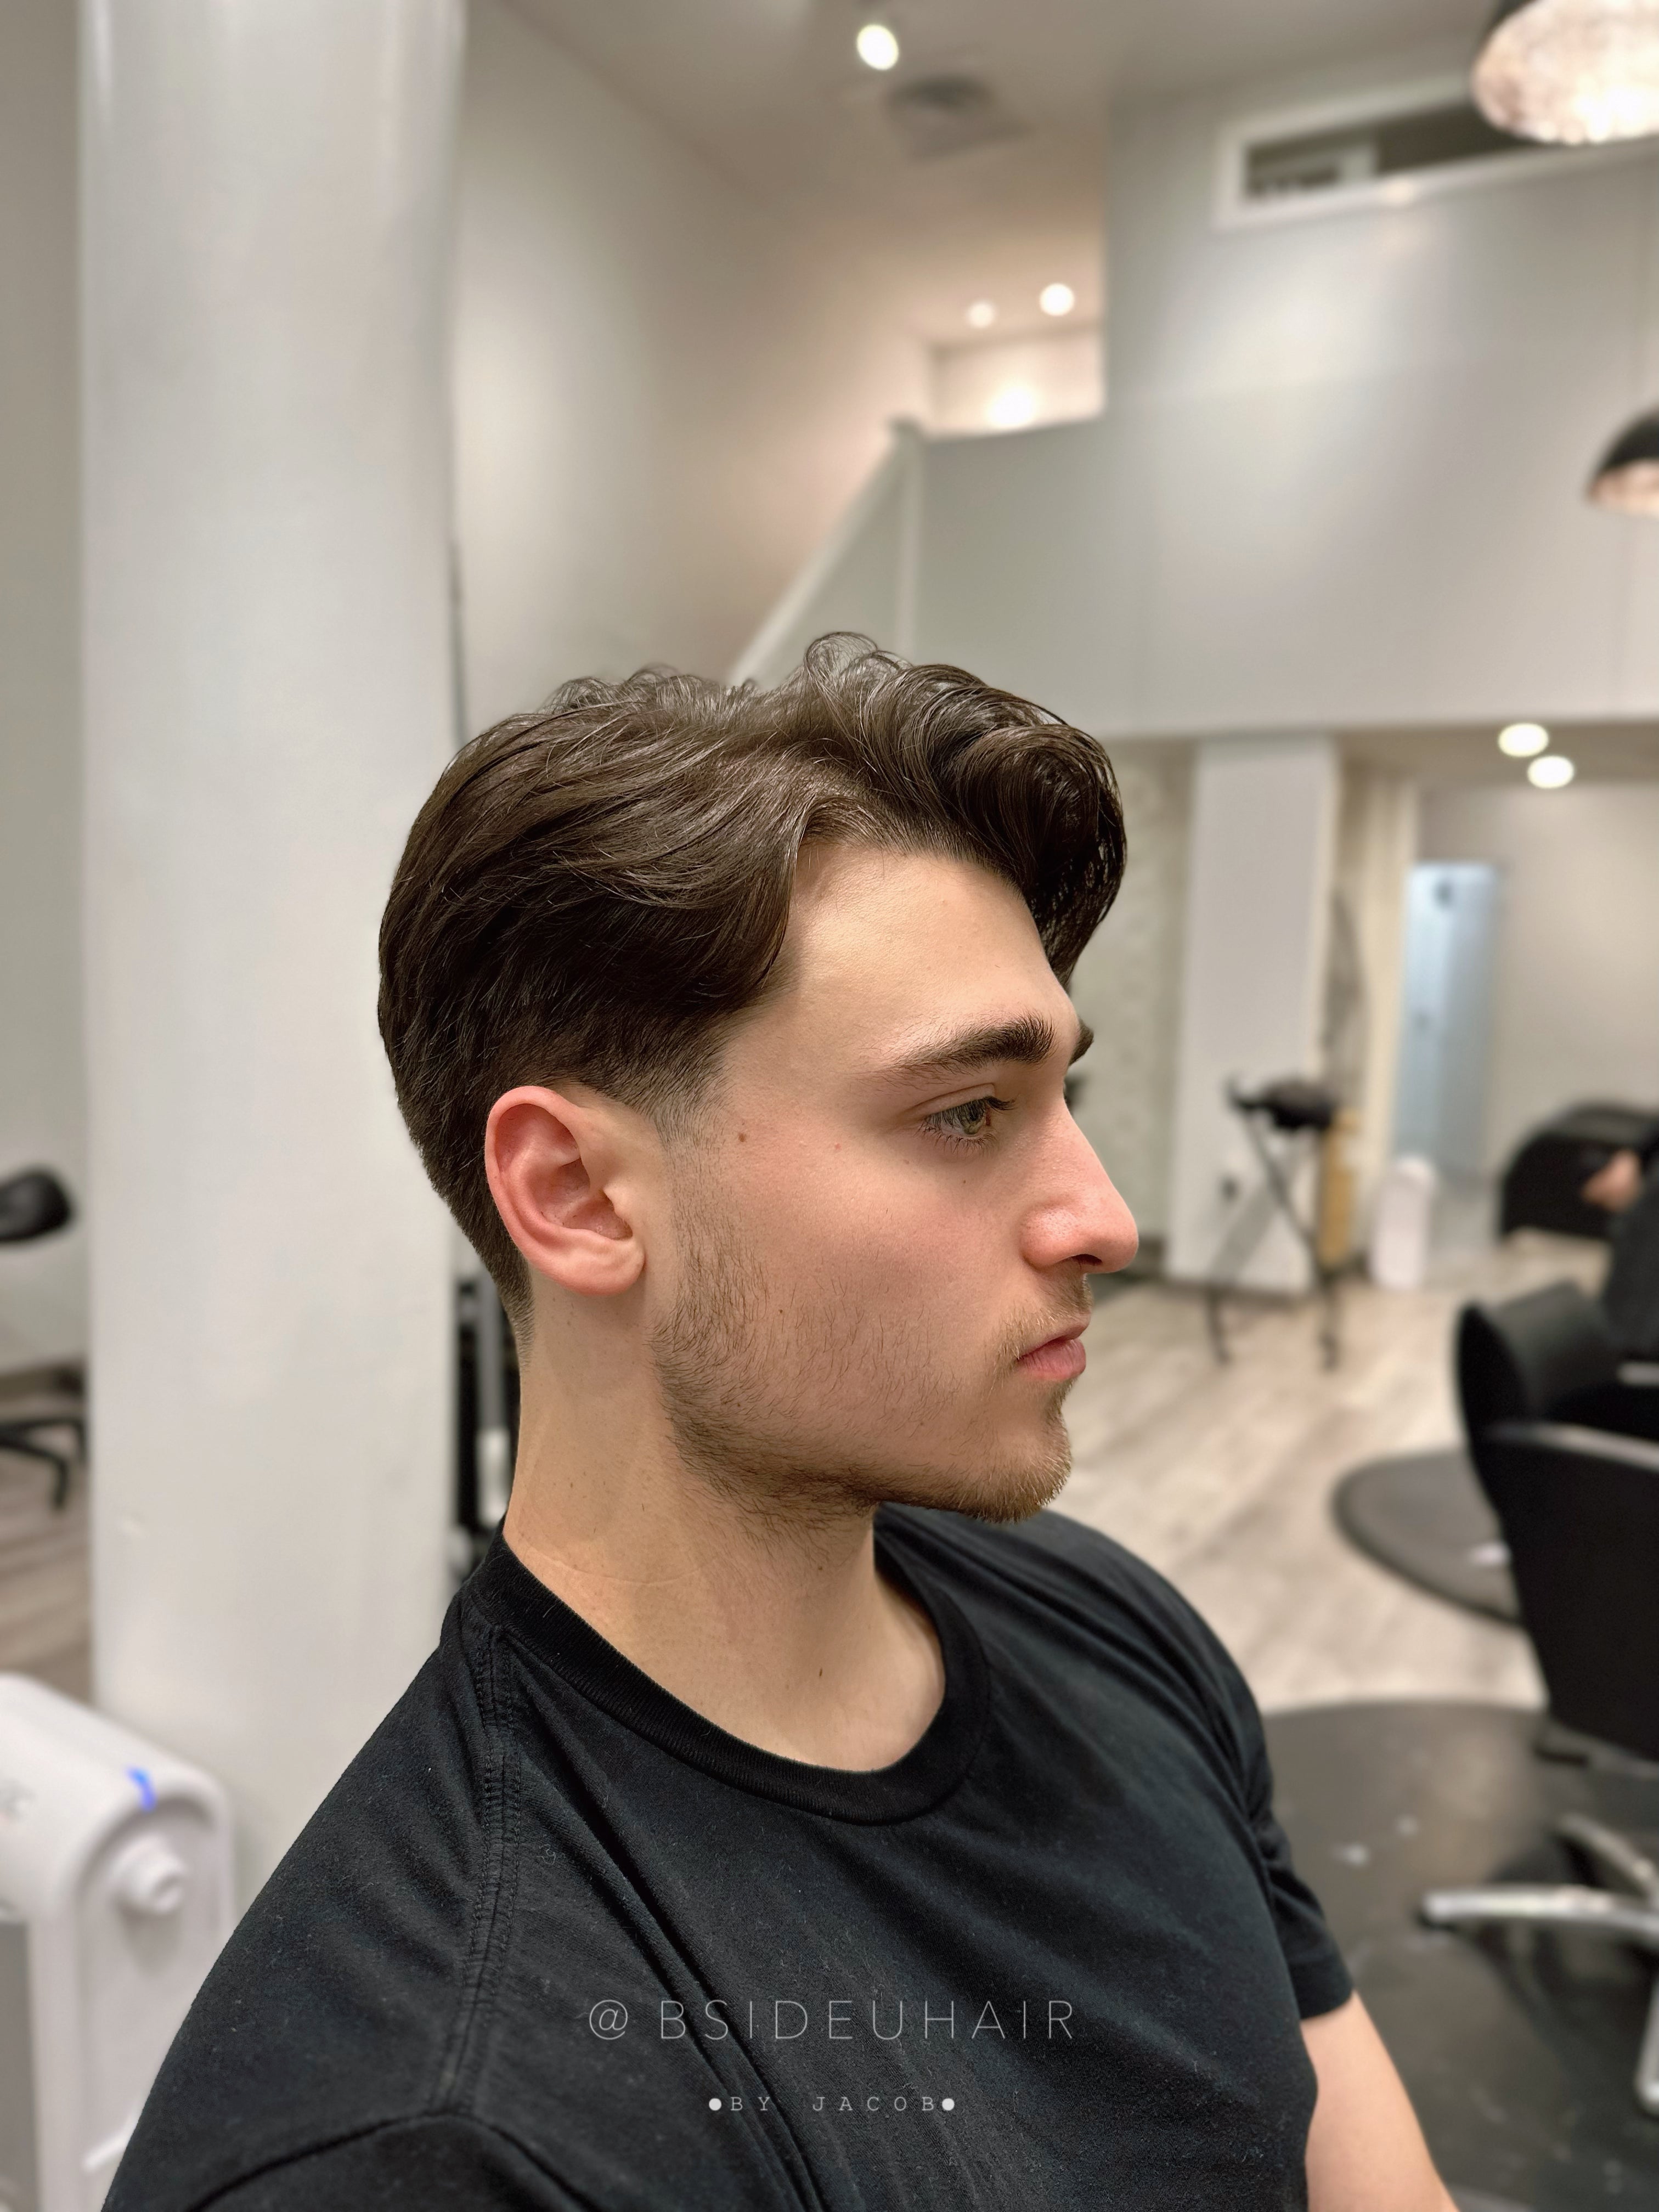 How to choose the right men's hairstyle based on your face shape